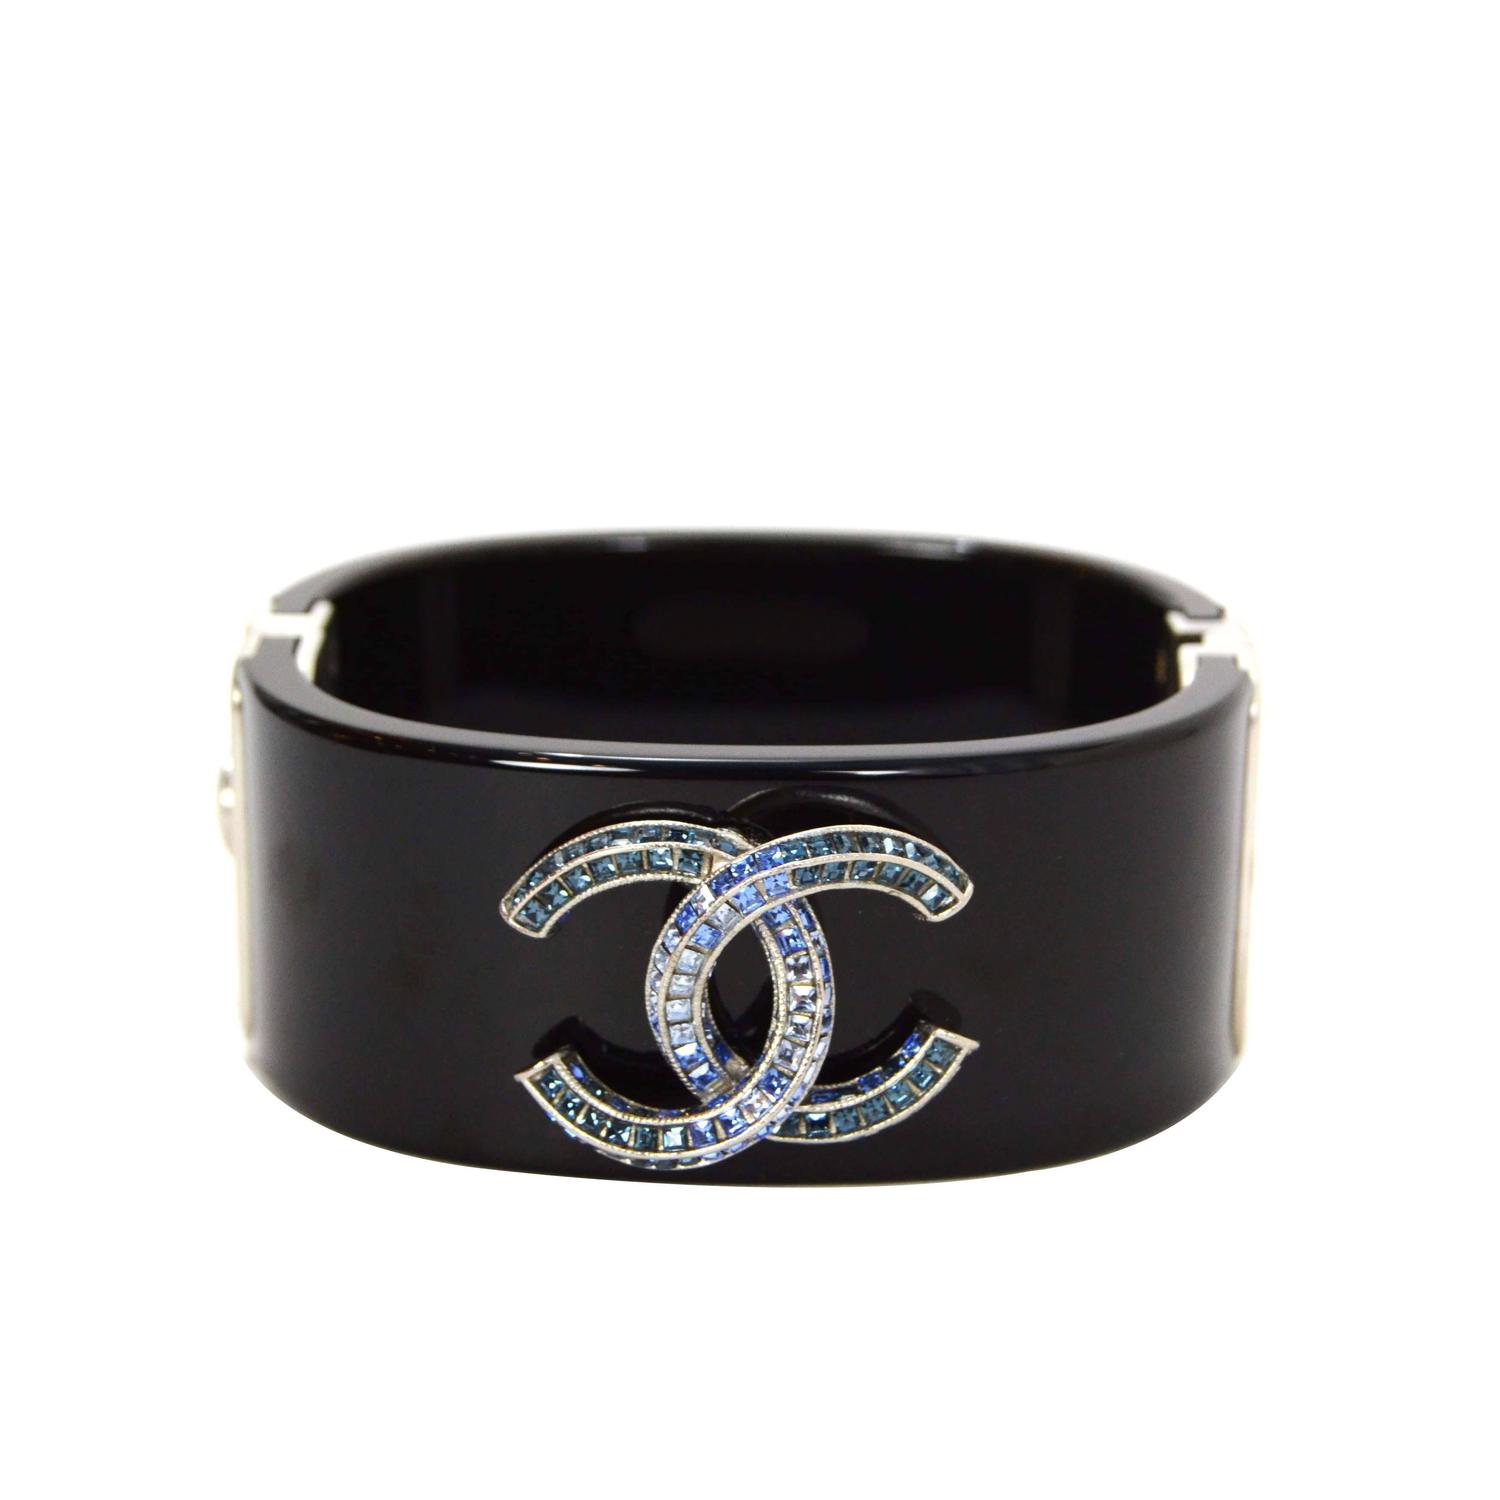 Chanel ‘15 Black Resin and Blue Crystal CC Cuff Bracelet at 1stdibs